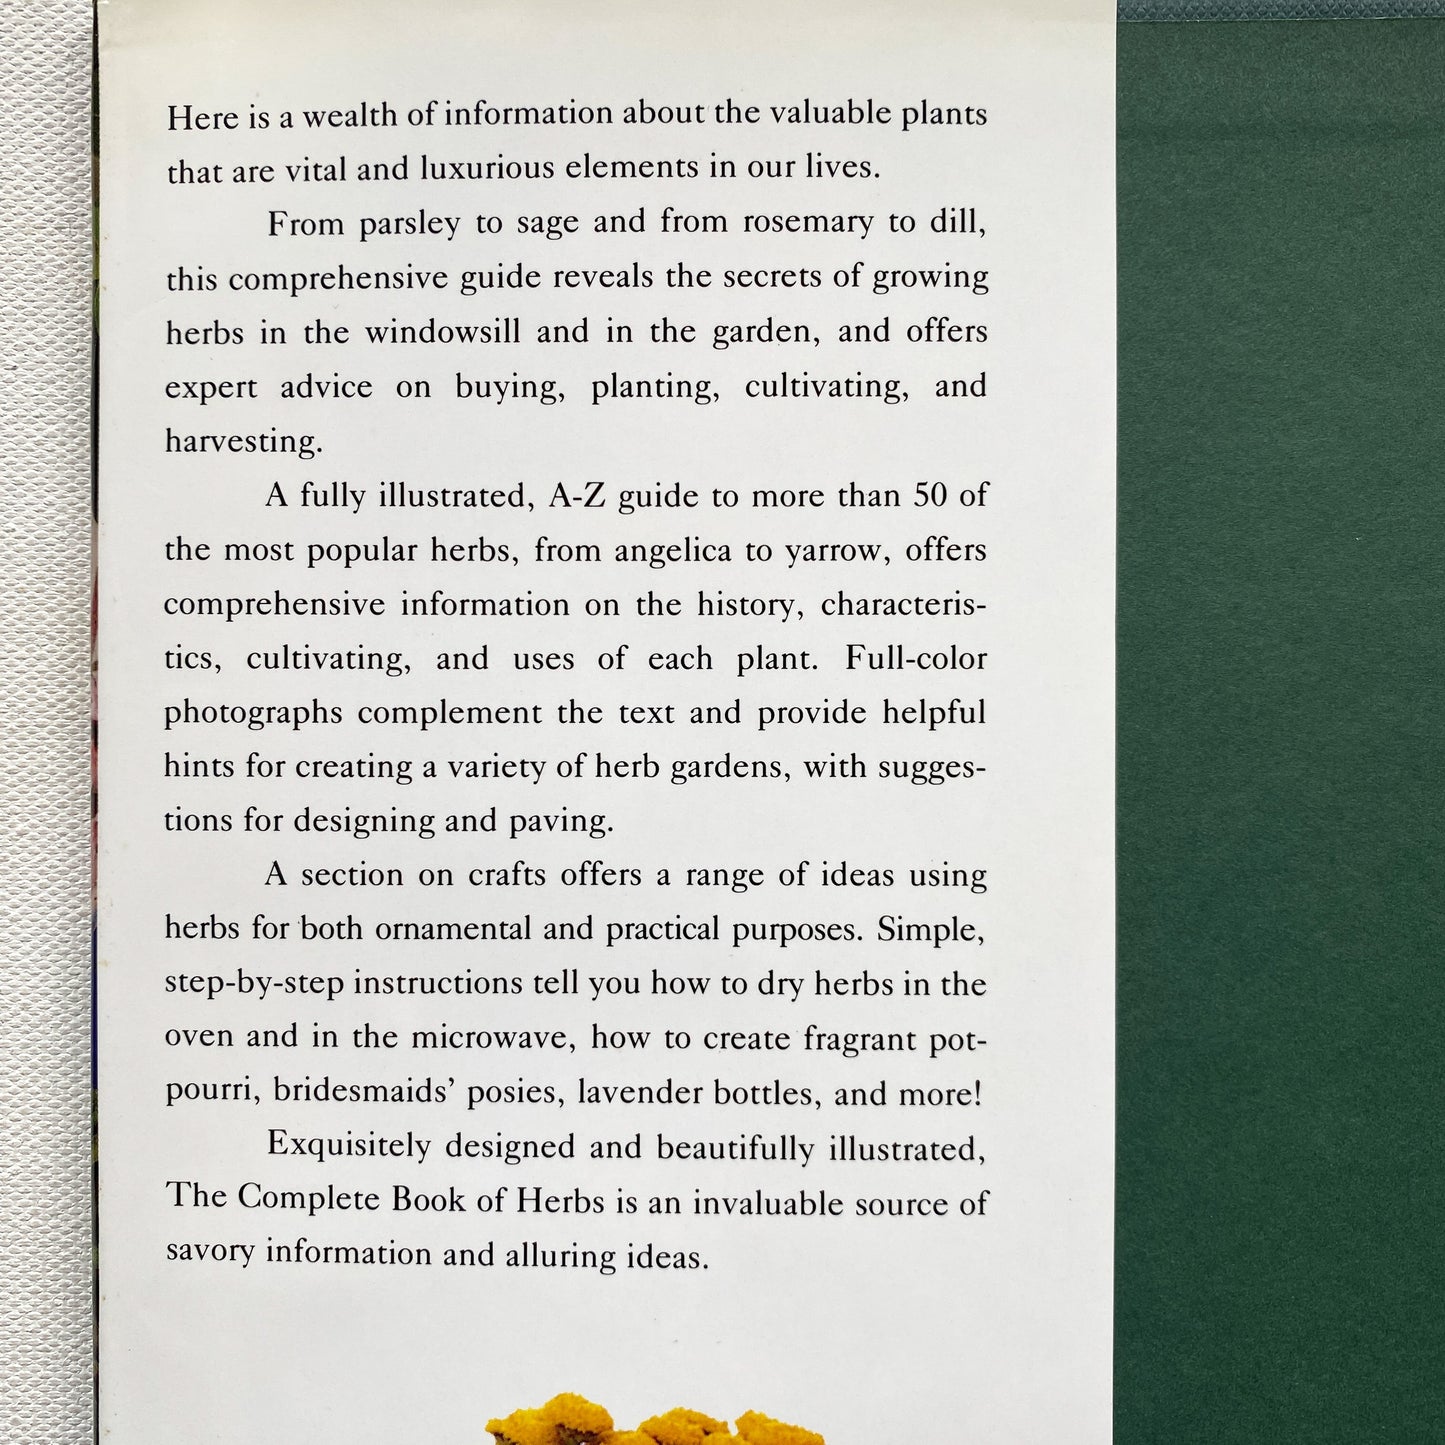 The Complete Book of Herbs, Vintage Garden Reference Coffee Table Book